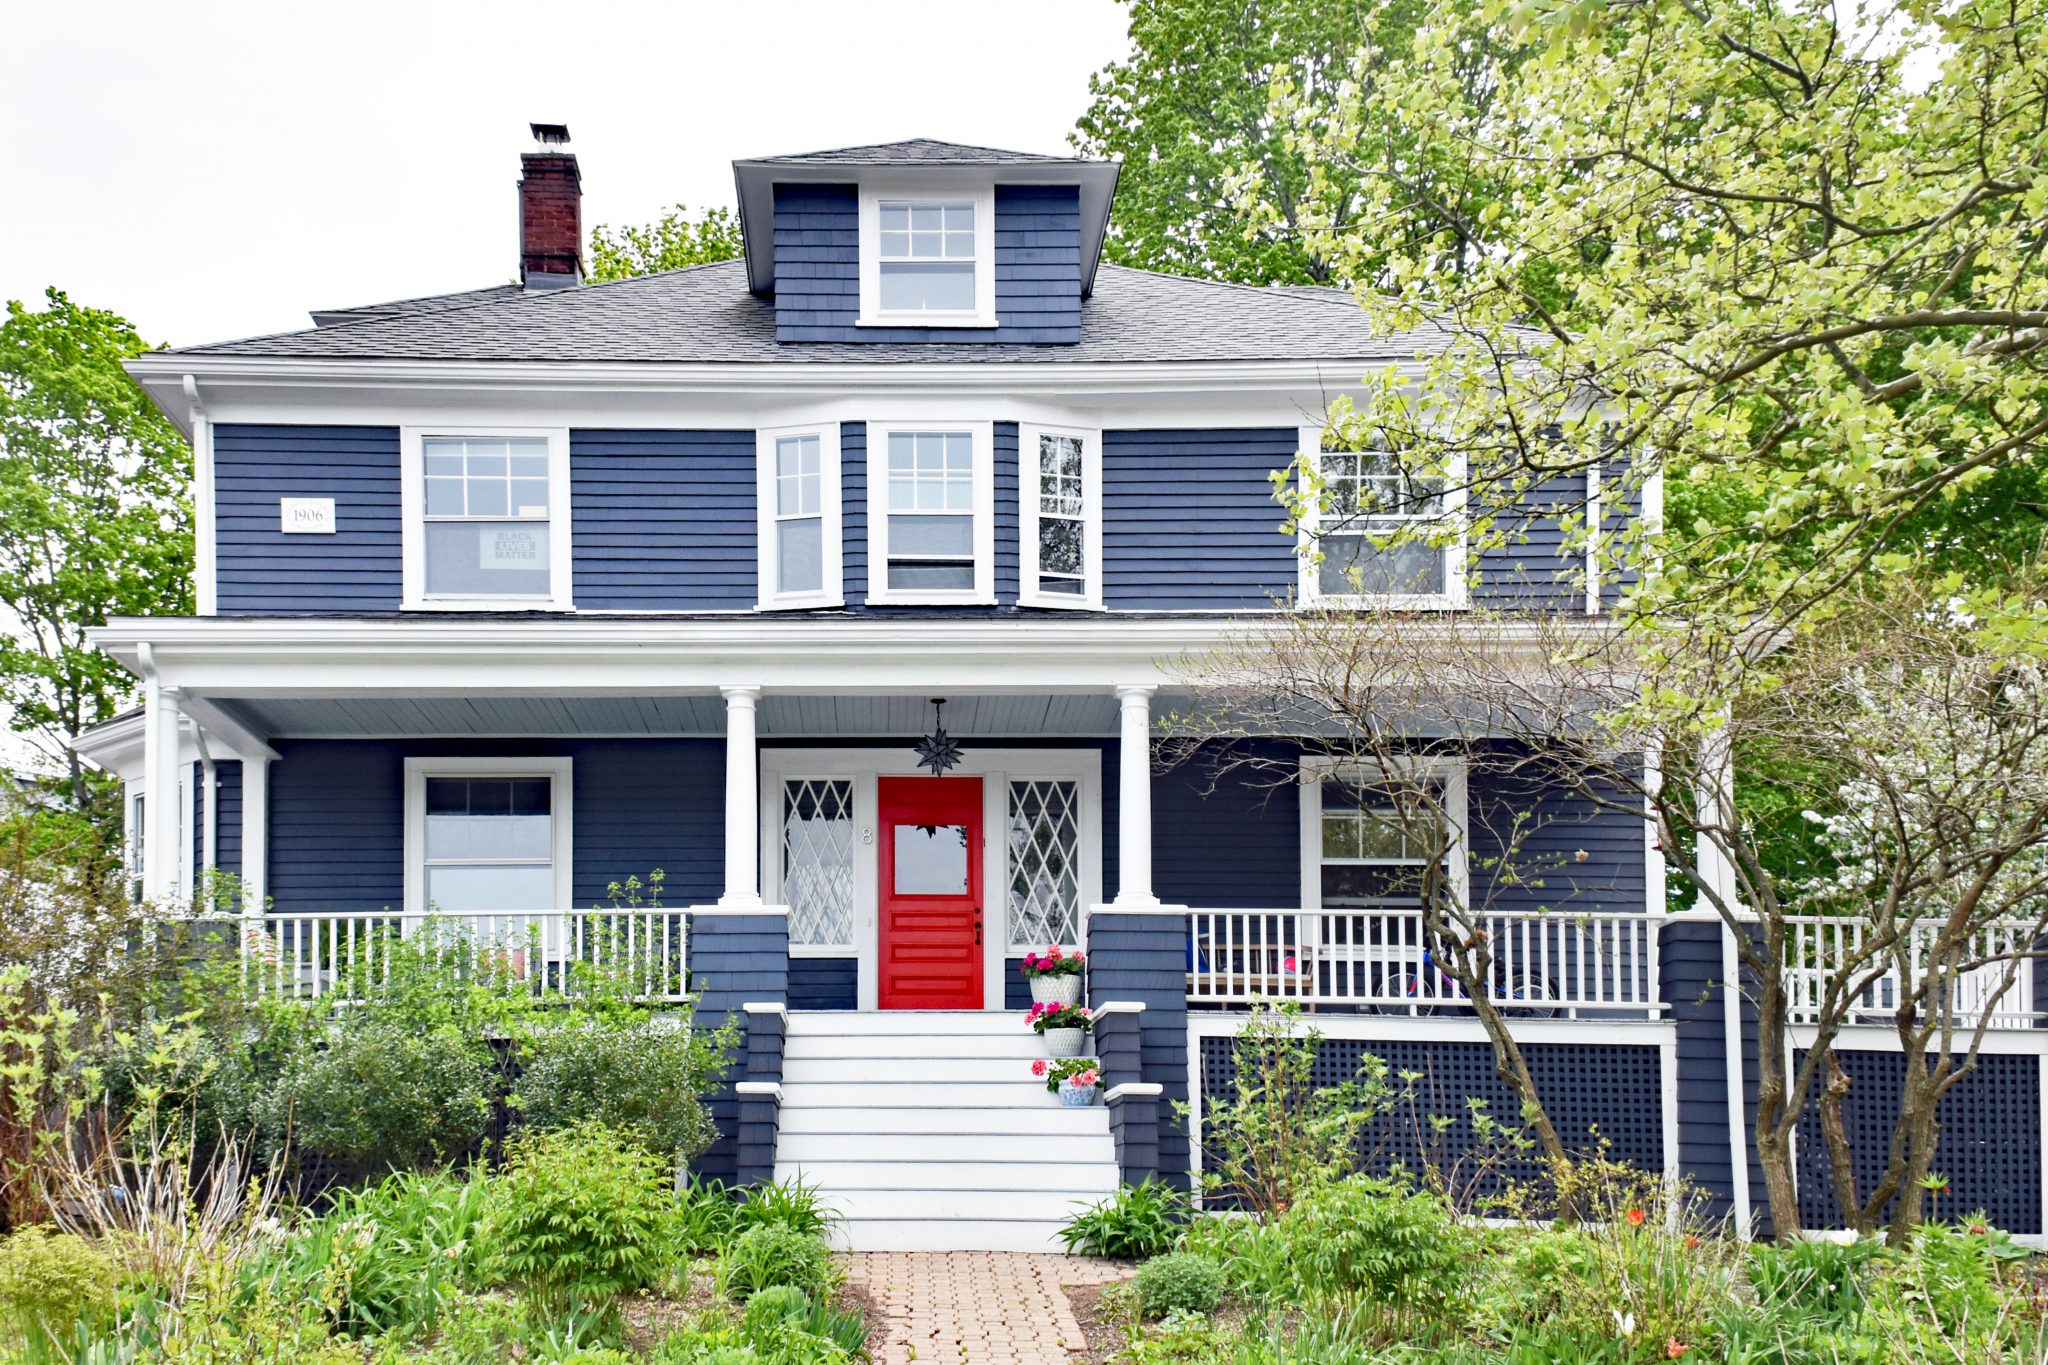 What Are the Best Front Door Colors for a Blue House? - The Front